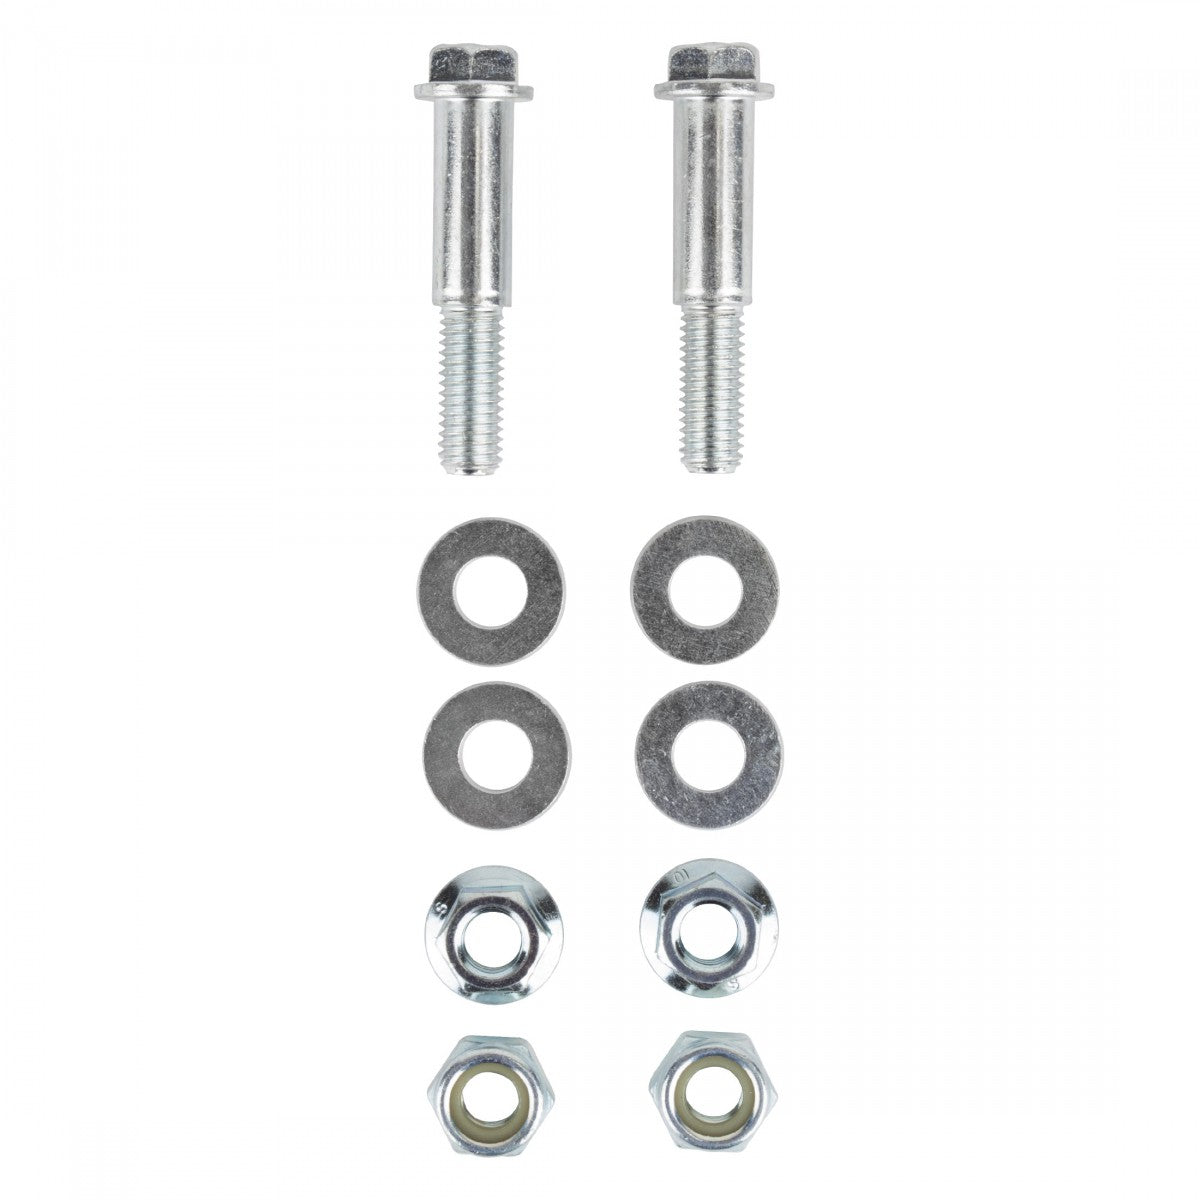 Wald 742F Training Wheel Bolts and Nuts Kit